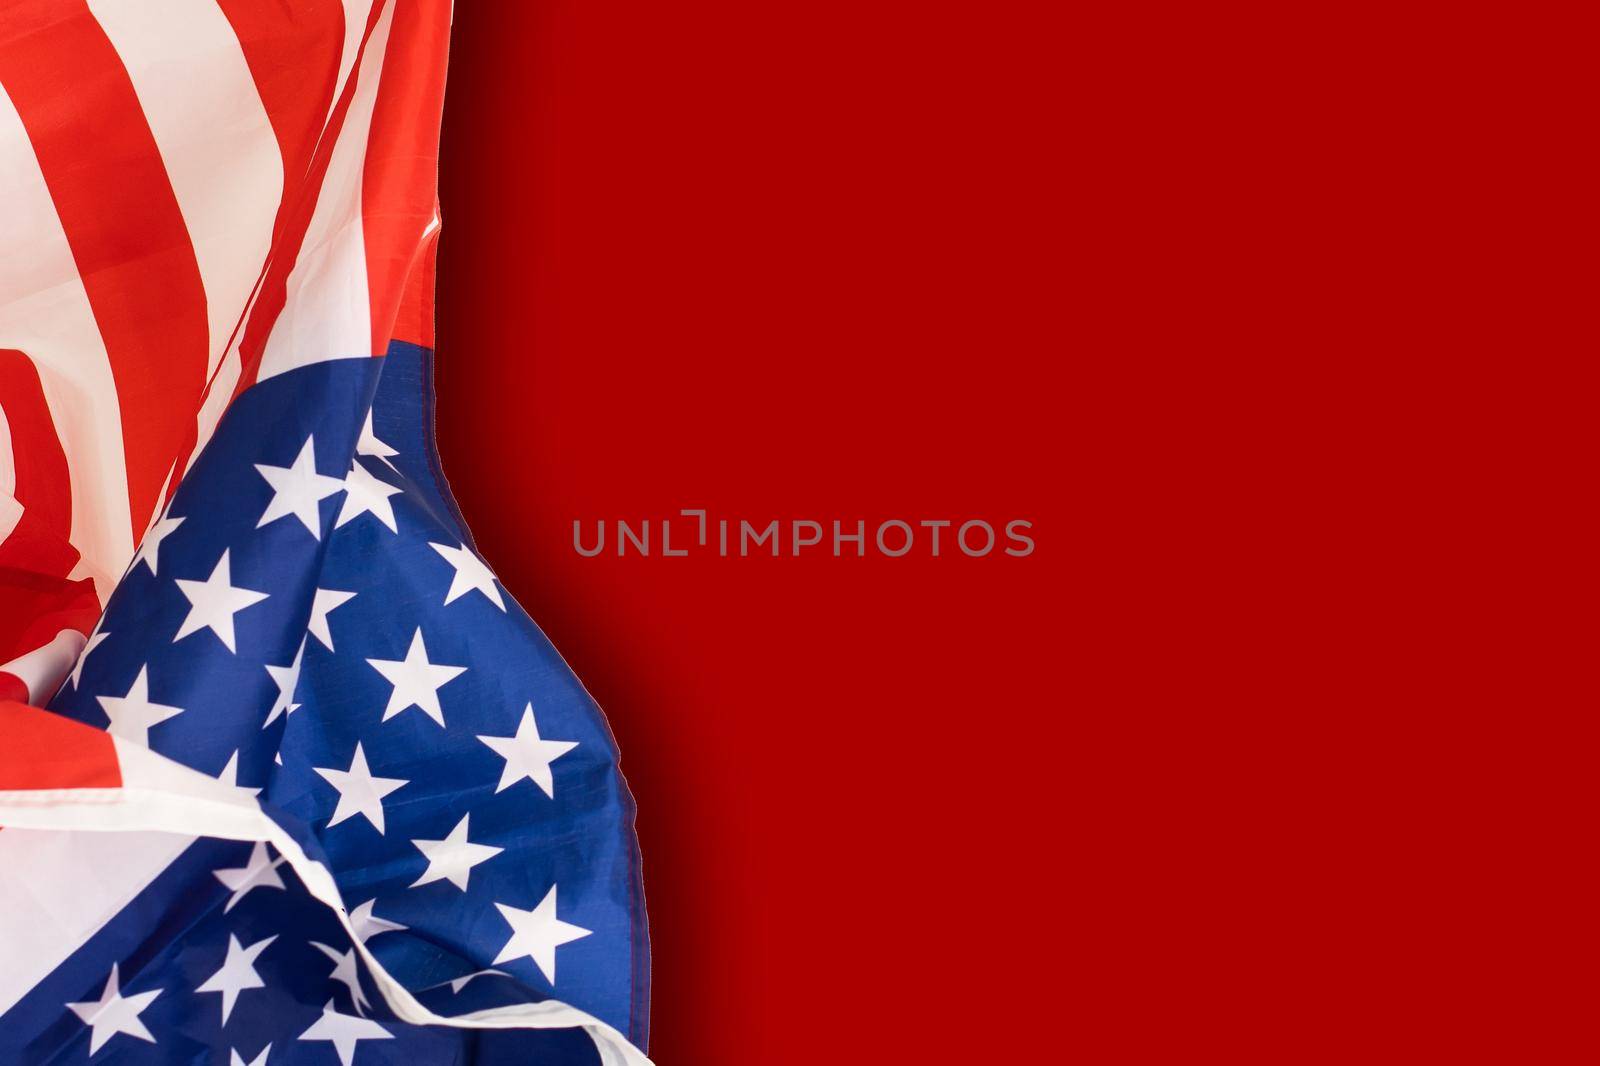 fragment of the flag of the United States on a red background by Andelov13